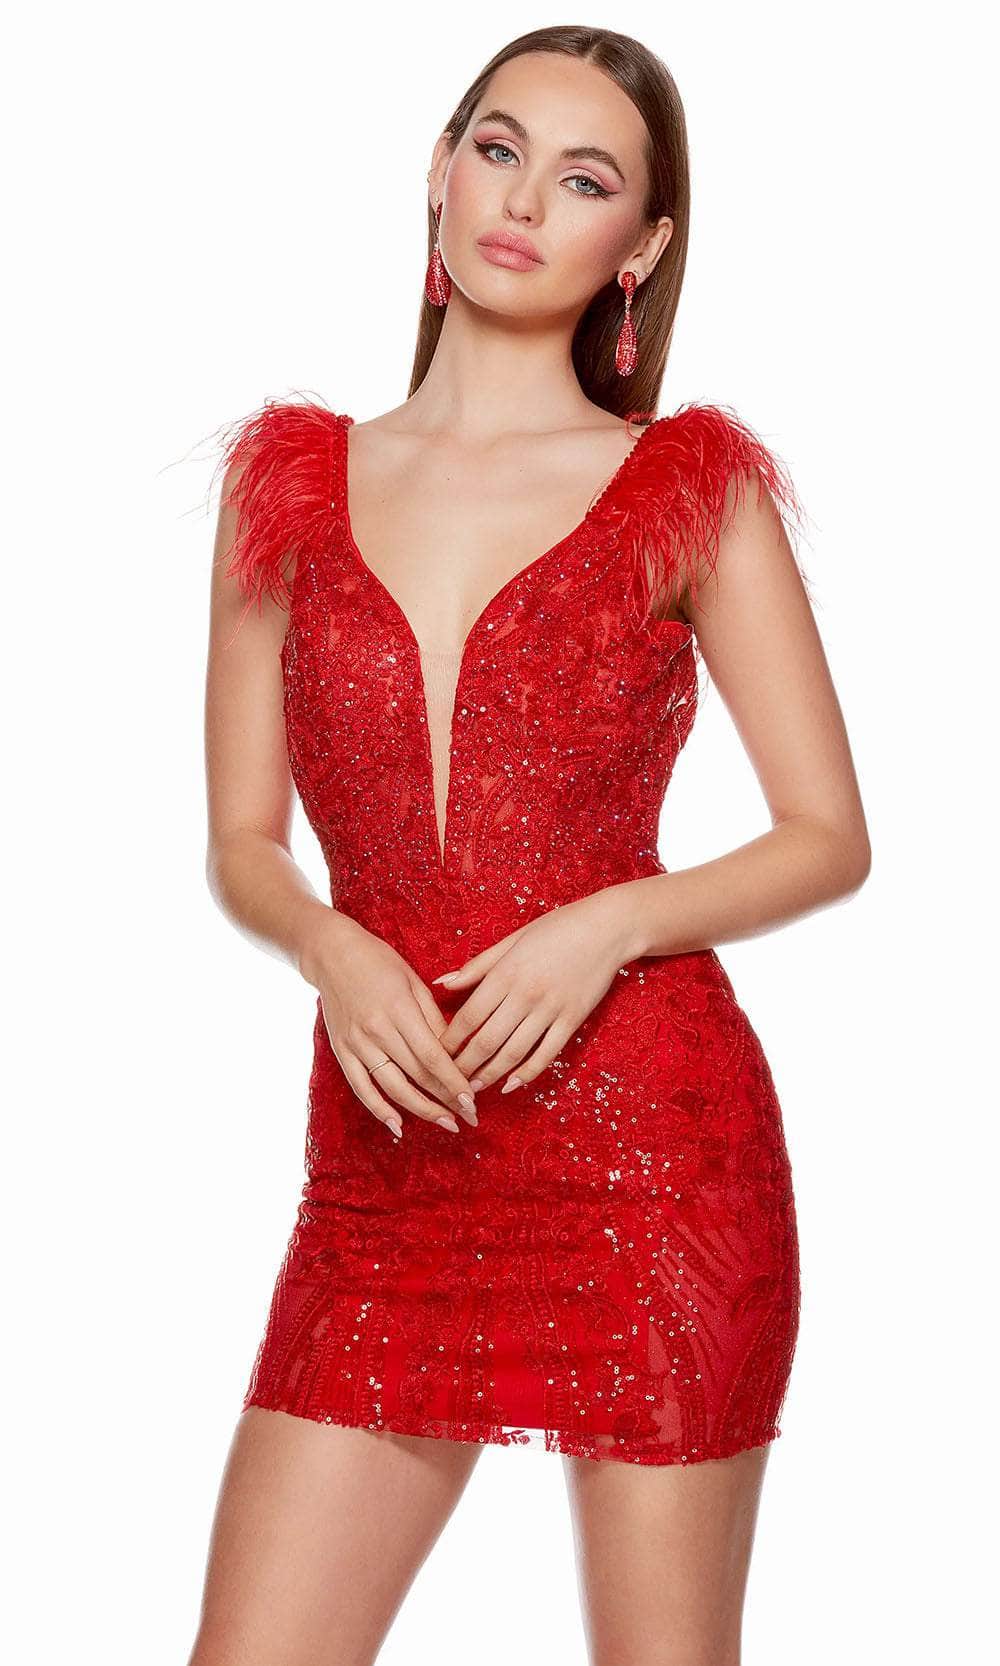 Alyce Paris 4614 - Plunging Lace Homecoming Dress
